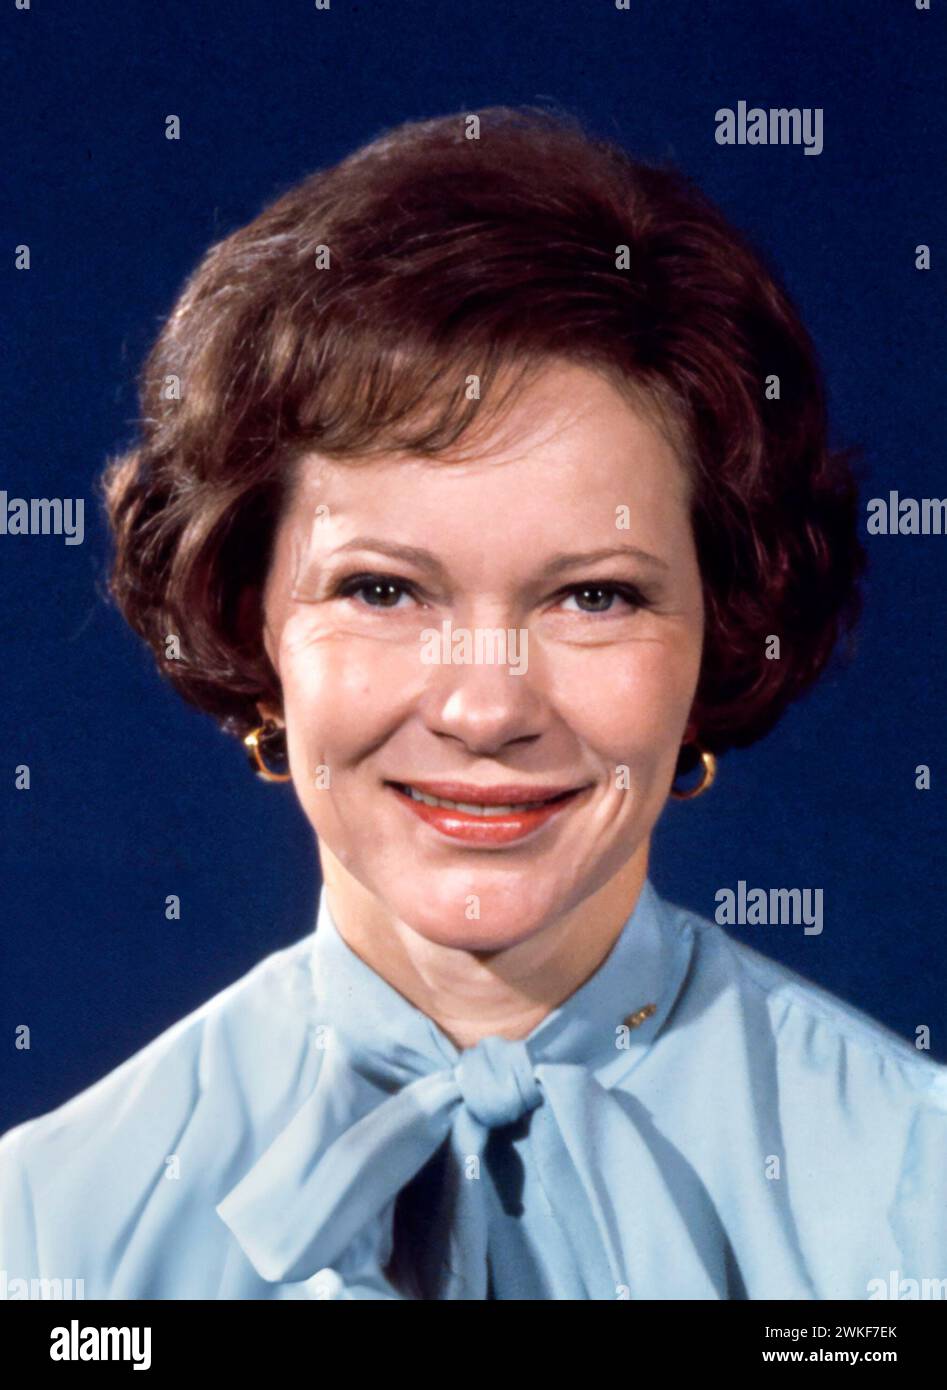 Rosalynn Carter. Portrait of the First Lady of the United States as the wife of President Jimmy Carter, Eleanor Rosalynn Carter (1927- 2023). Photo by Bernard Gotfryd, between 1977 and 1981 Stock Photo